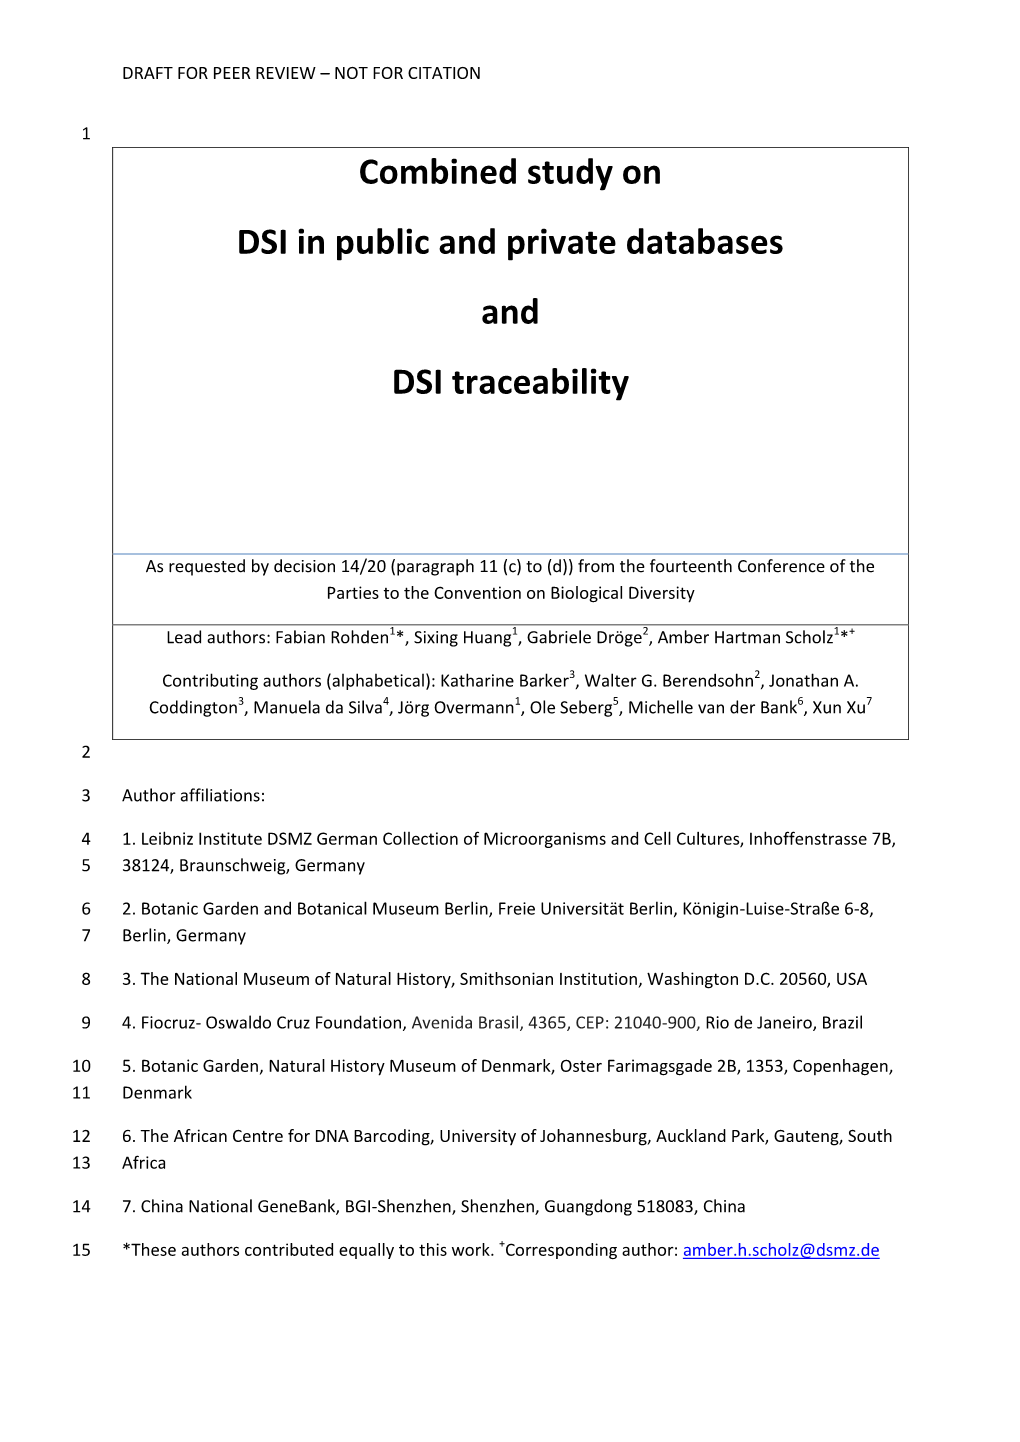 Combined Study on DSI in Public and Private Databases and DSI Traceability